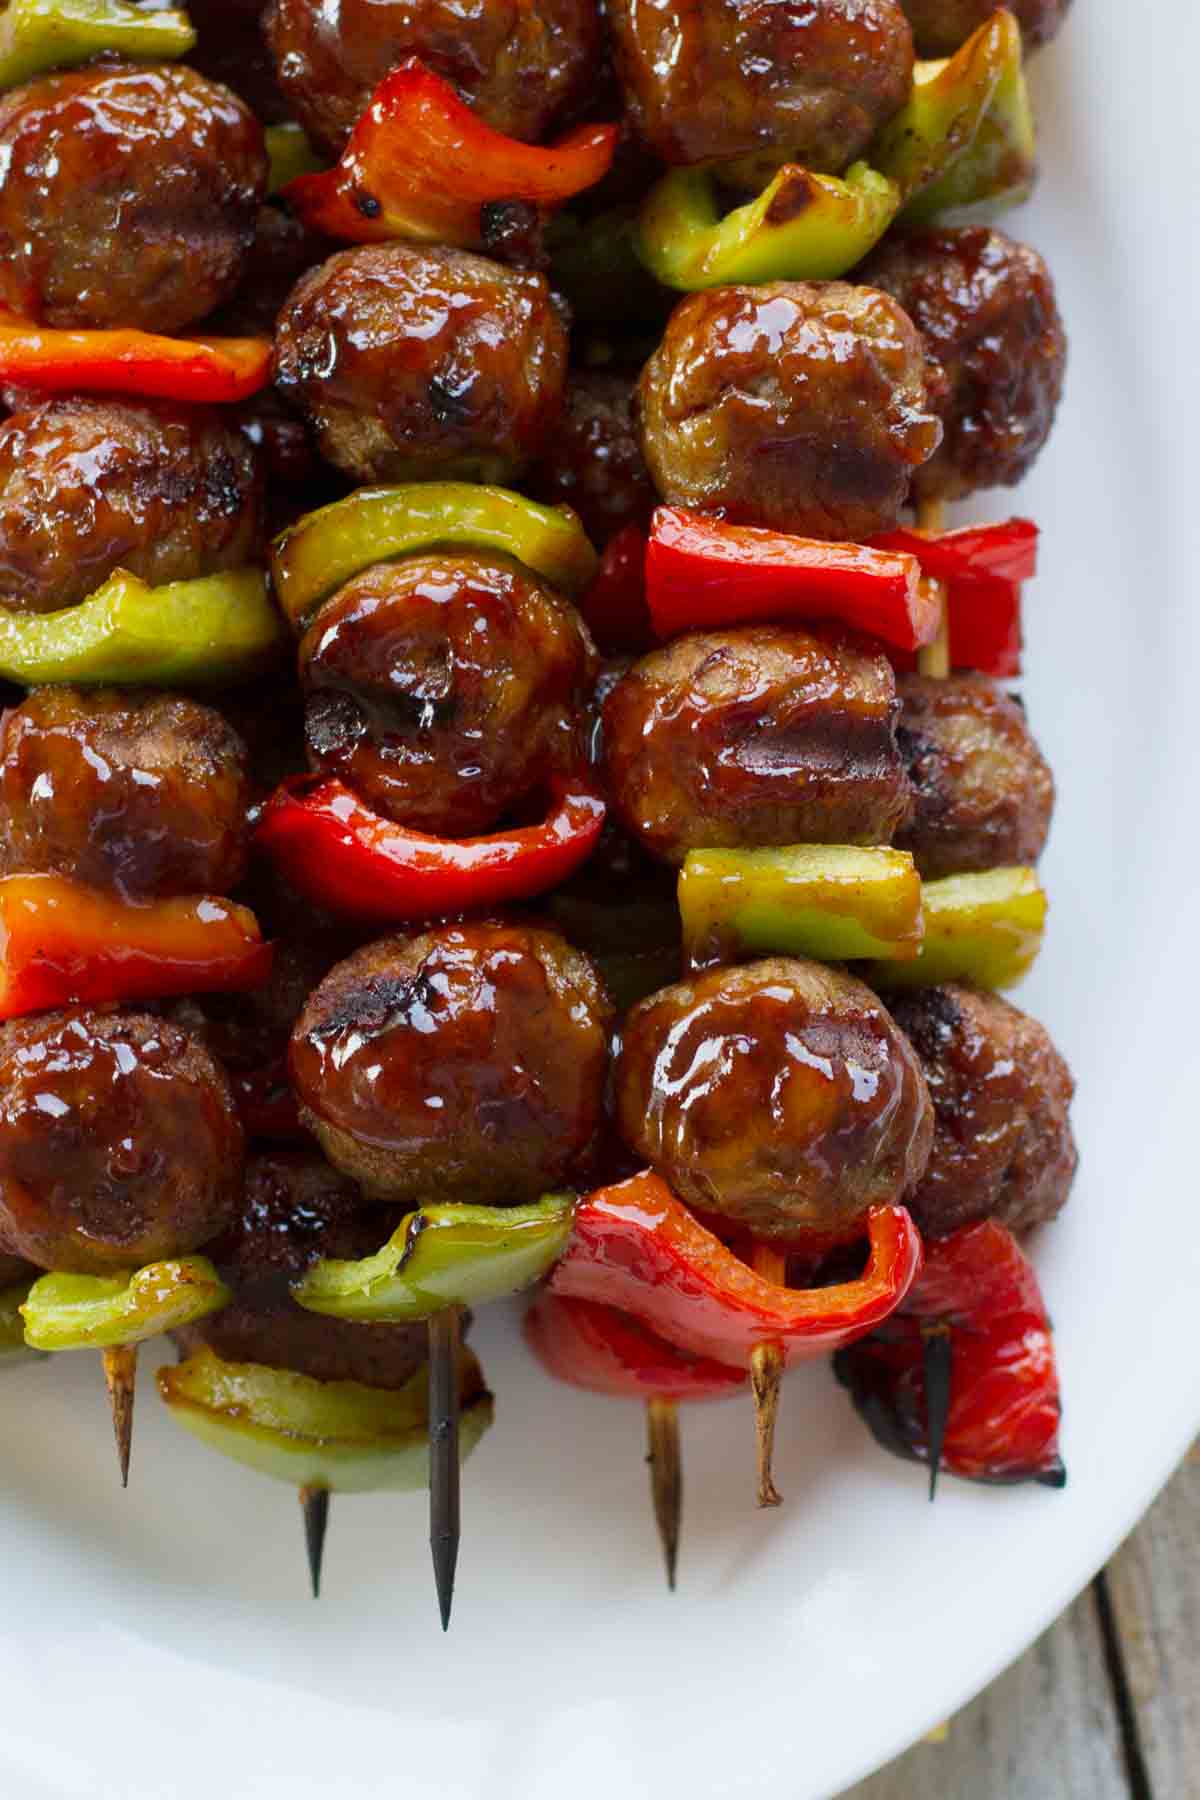 skewers with meatballs and peppers brushed with sweet and sour sauce